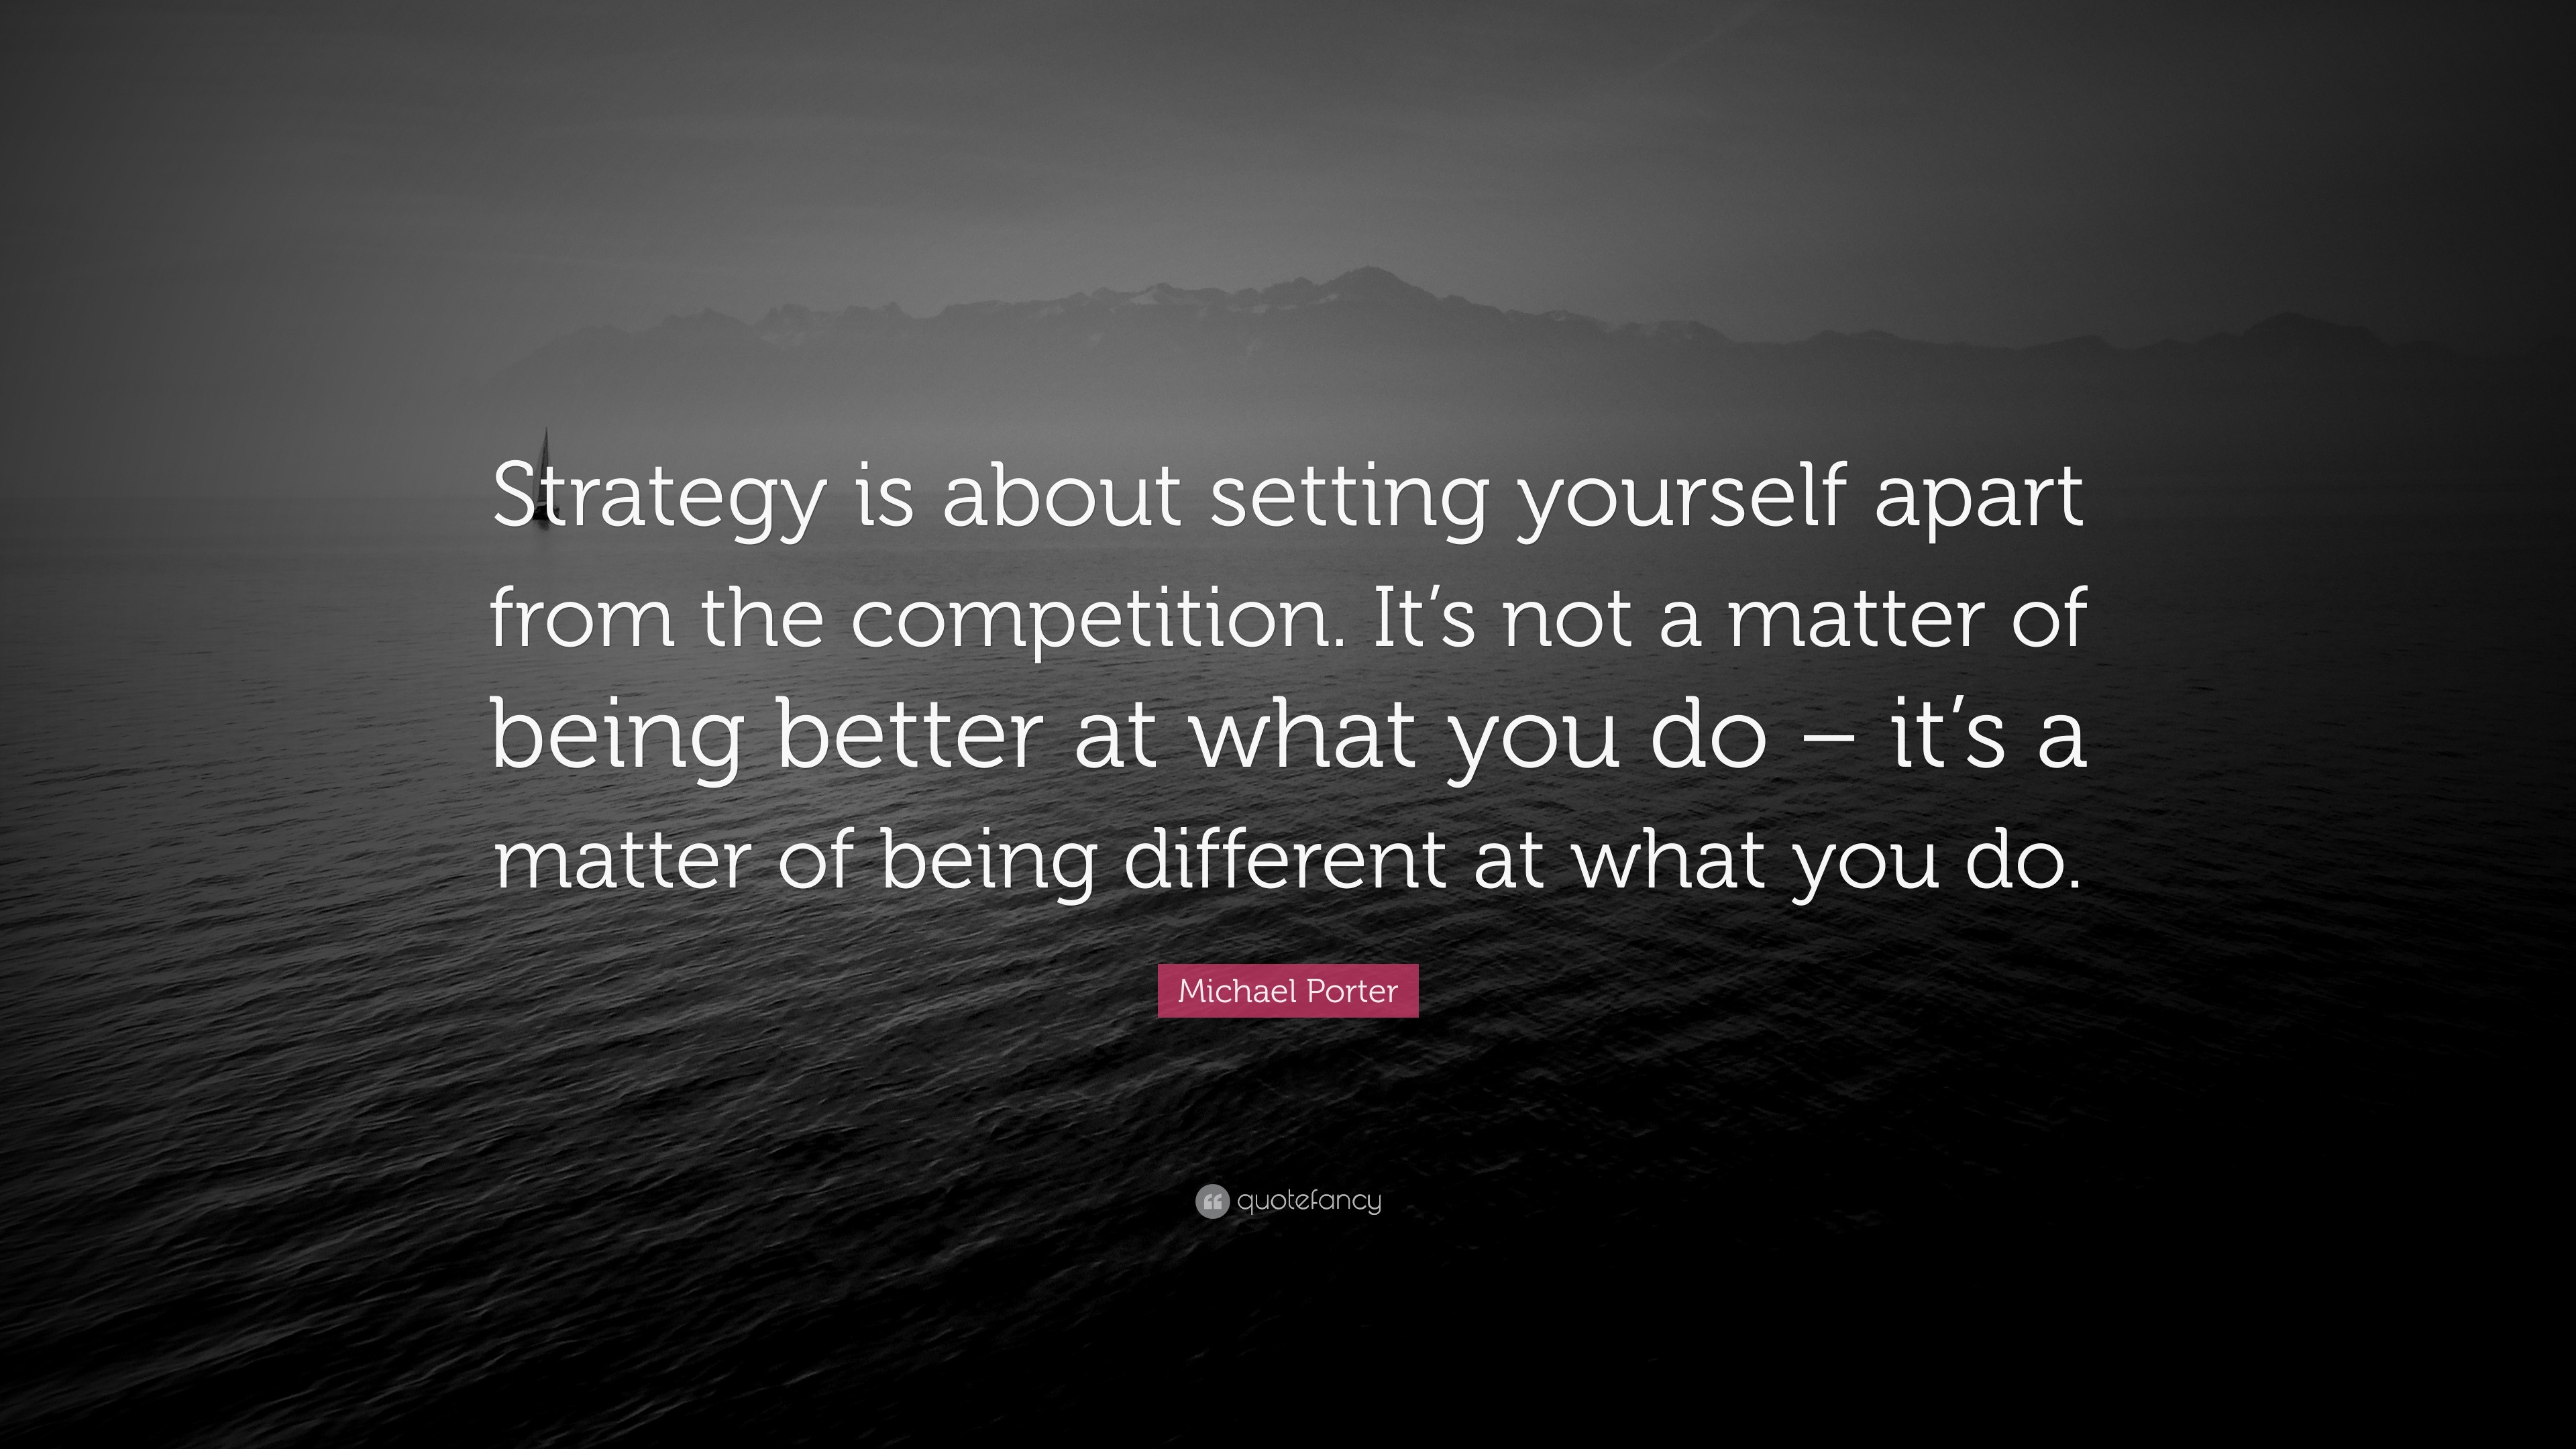 Michael Porter Quote: “Strategy is about setting yourself apart from